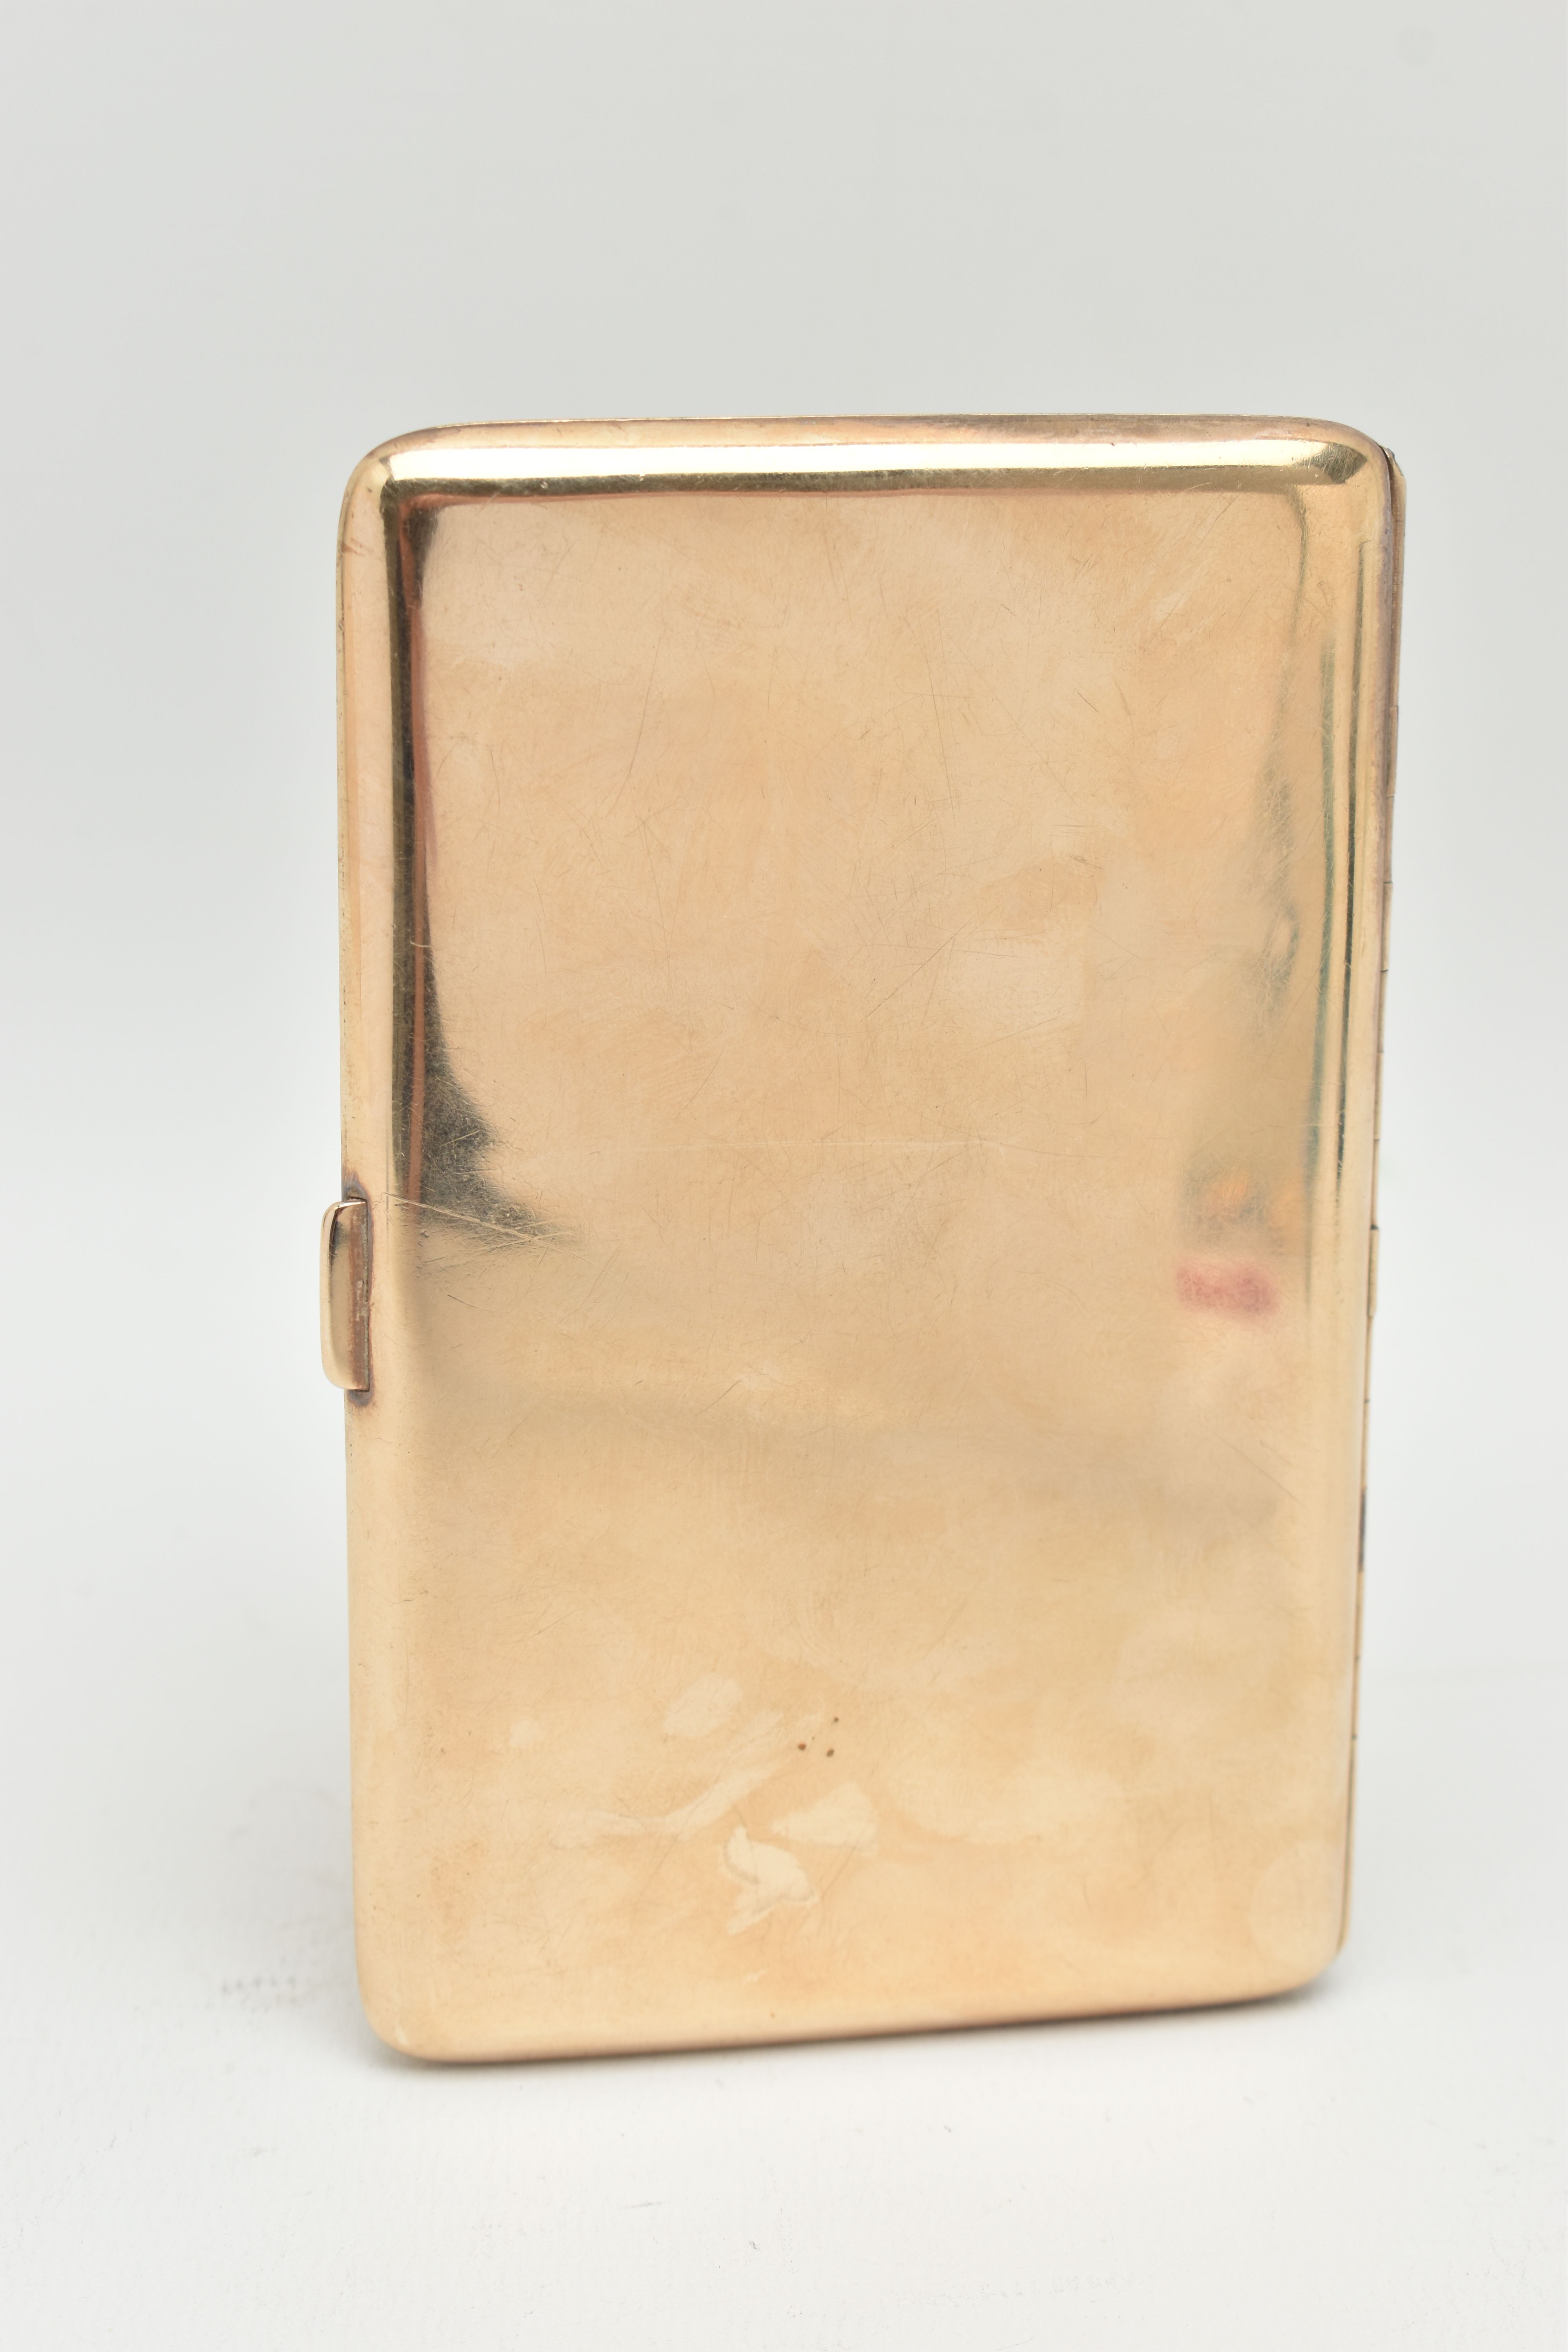 AN EARLY 20TH CENTURY, 9CT GOLD CIGARETTE CASE, of a rectangular form, polished design with - Image 2 of 6